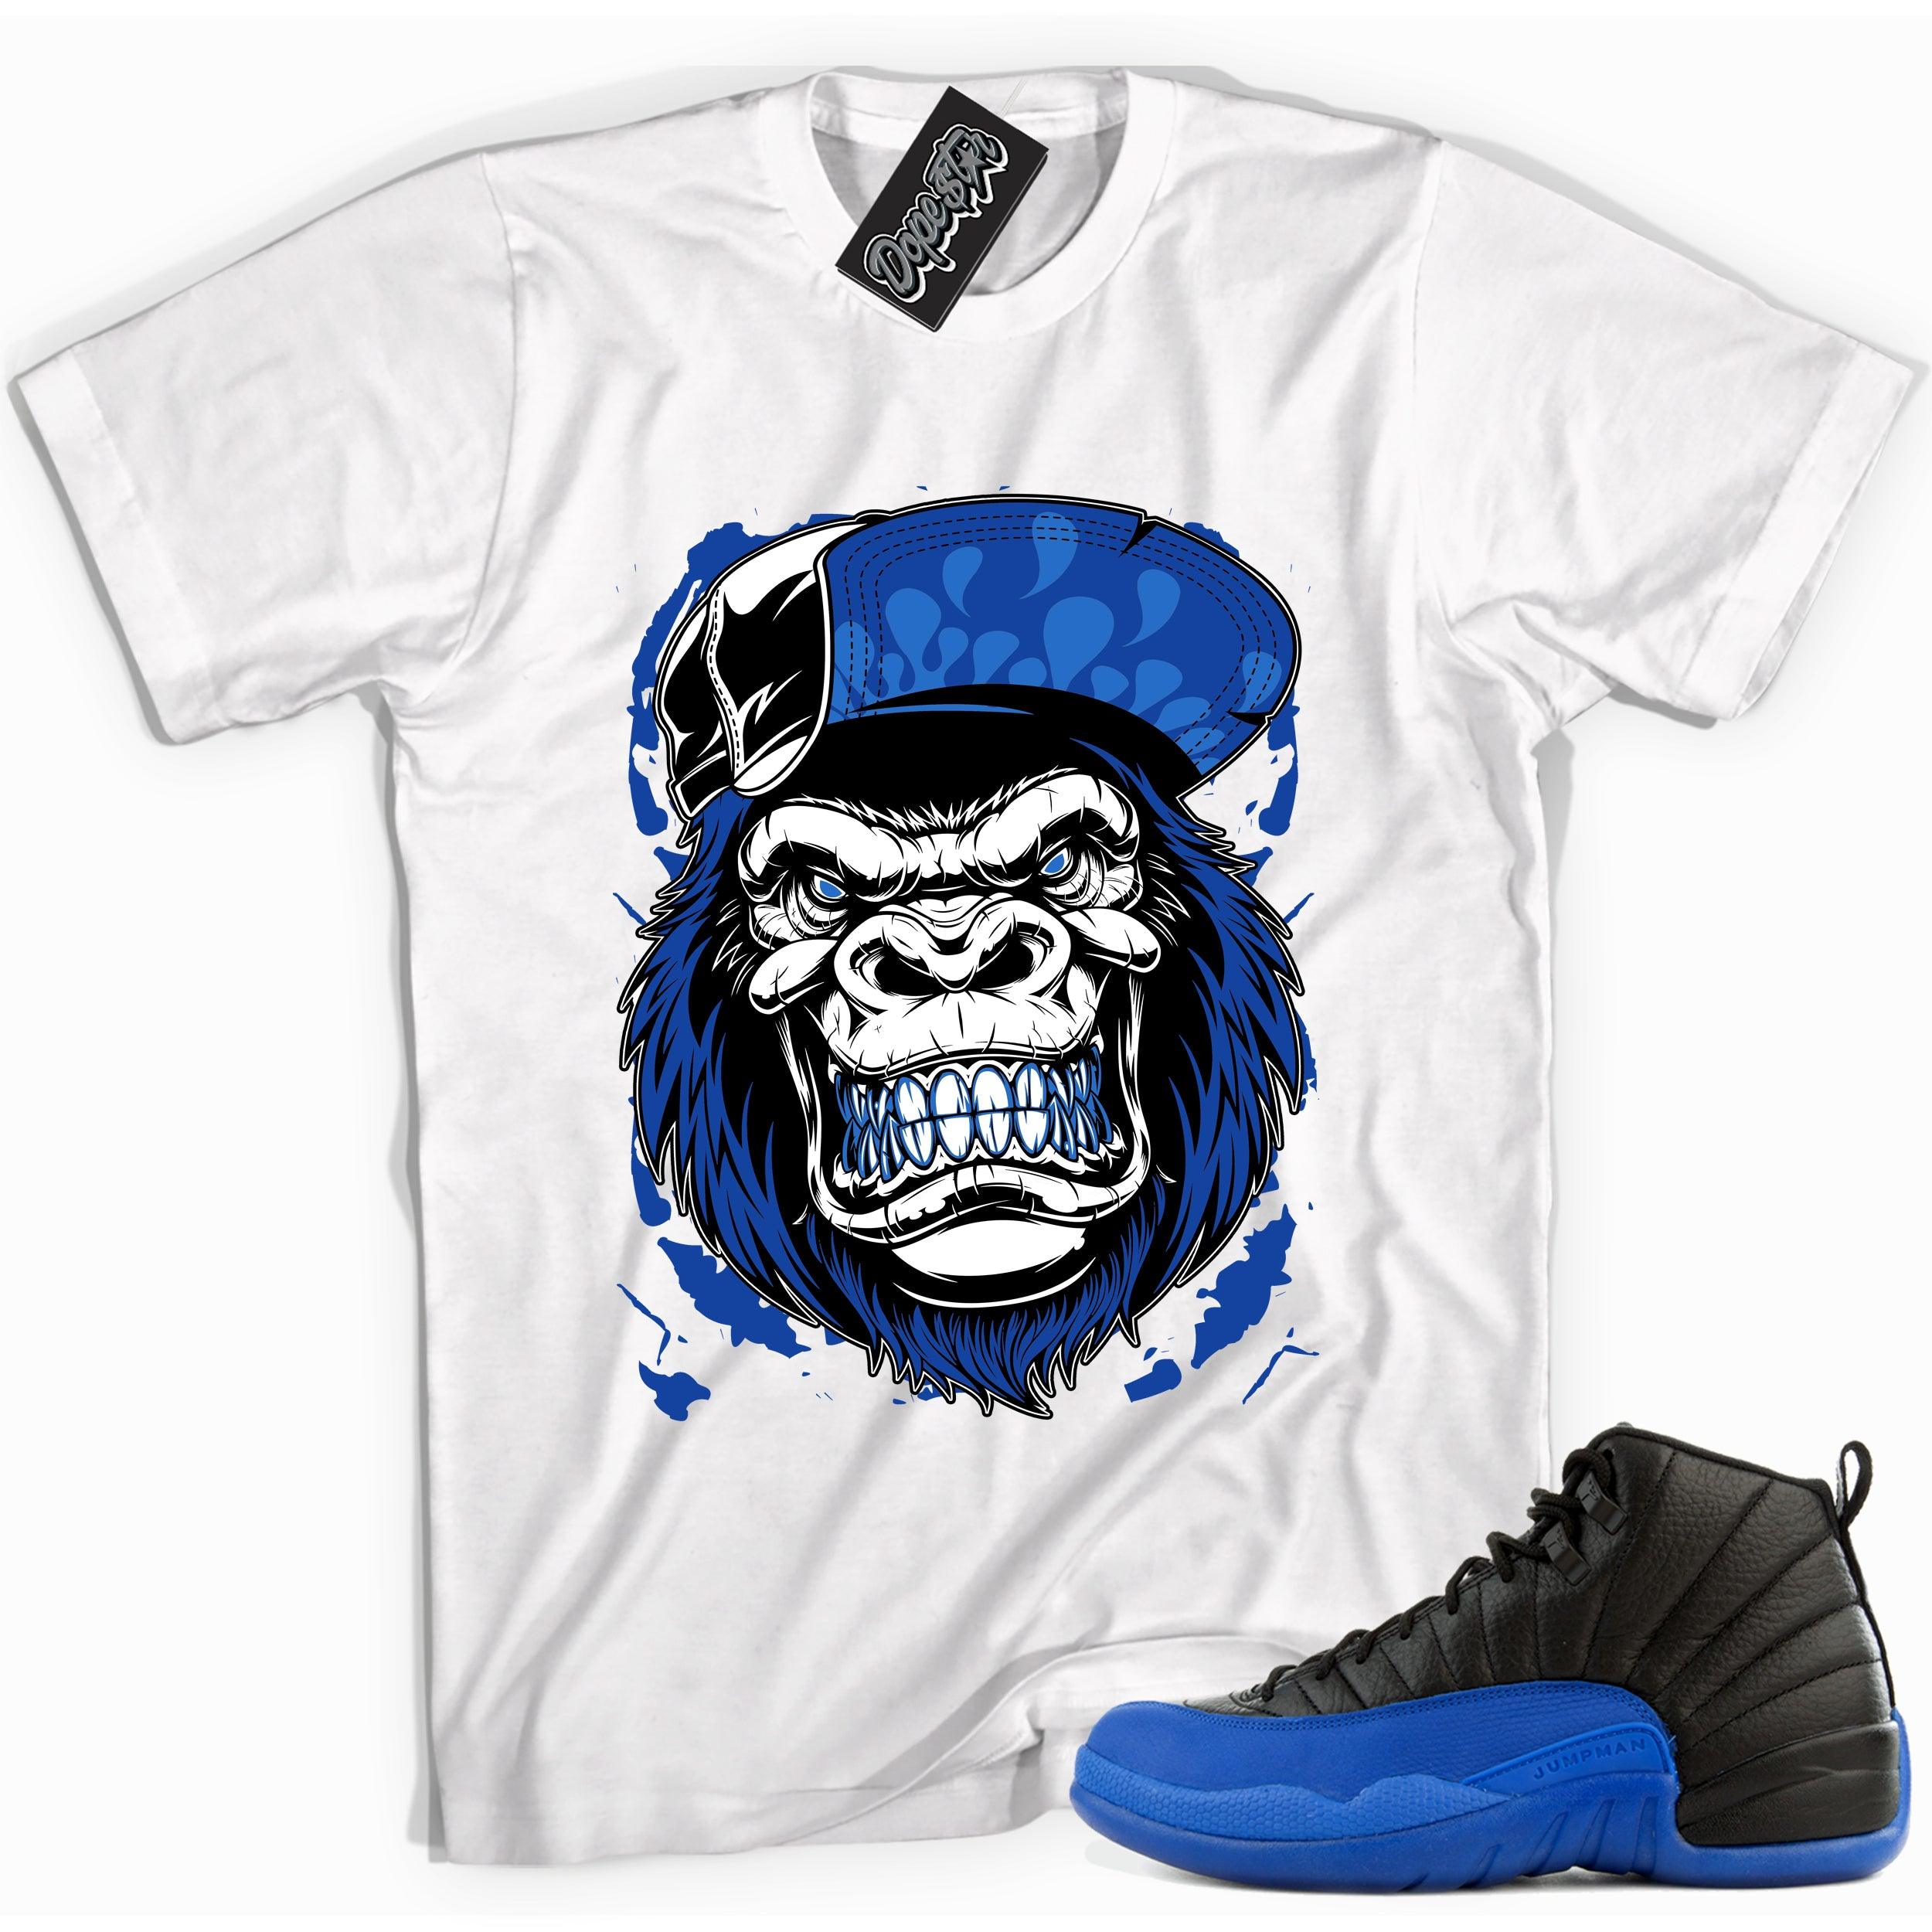 Cool white graphic tee with 'gorilla beast' print, that perfectly matches Air Jordan 12 Retro Black Game Royal sneakers.